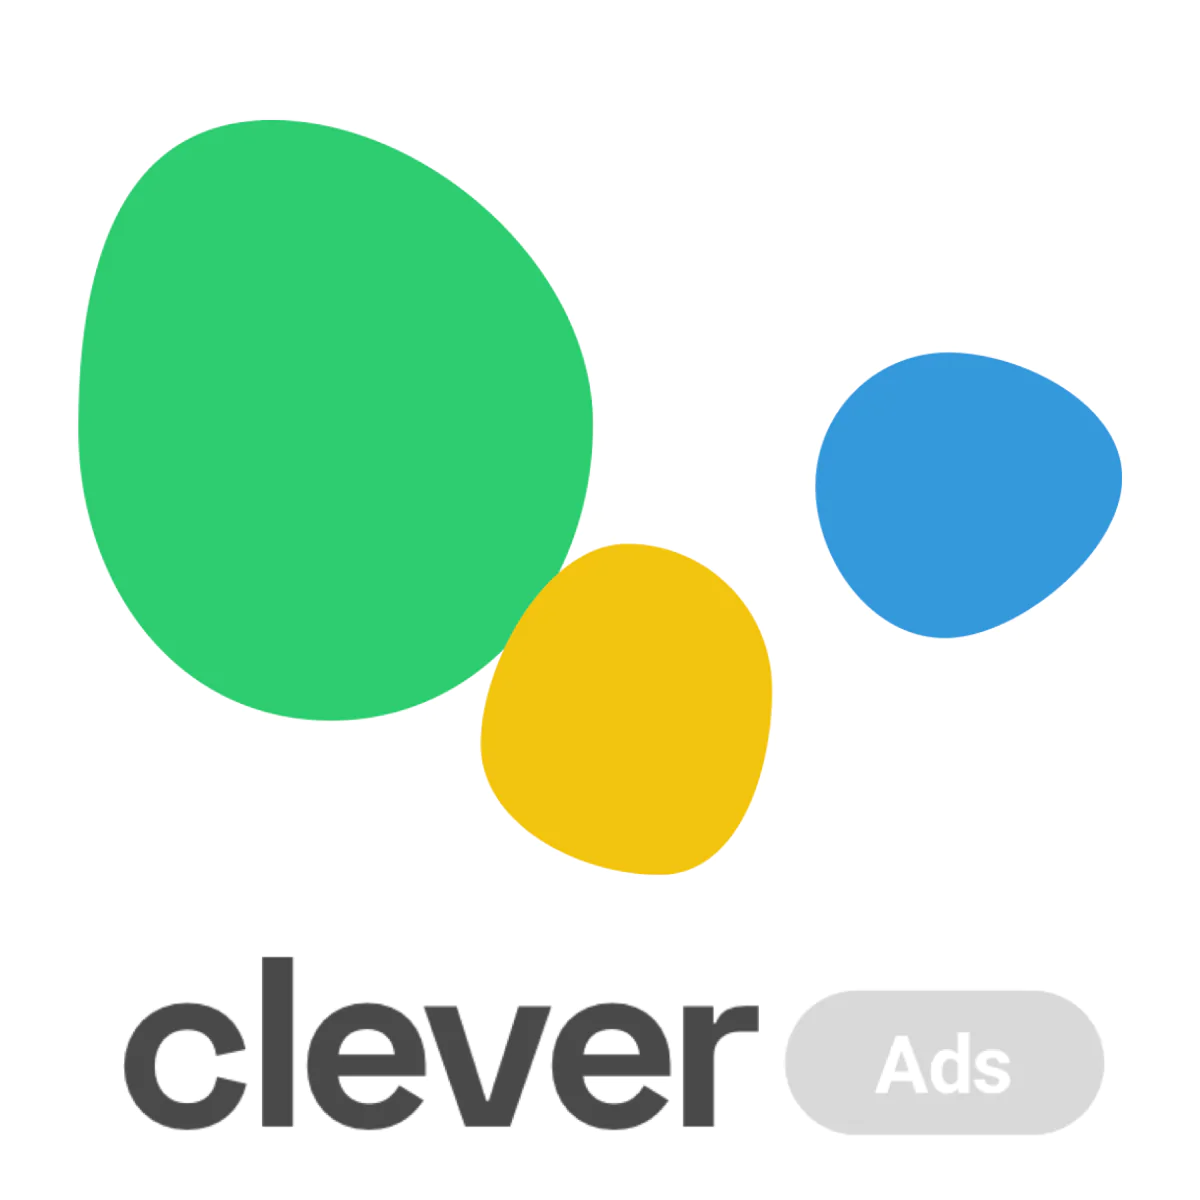 Clever: Google Ads & Shopping